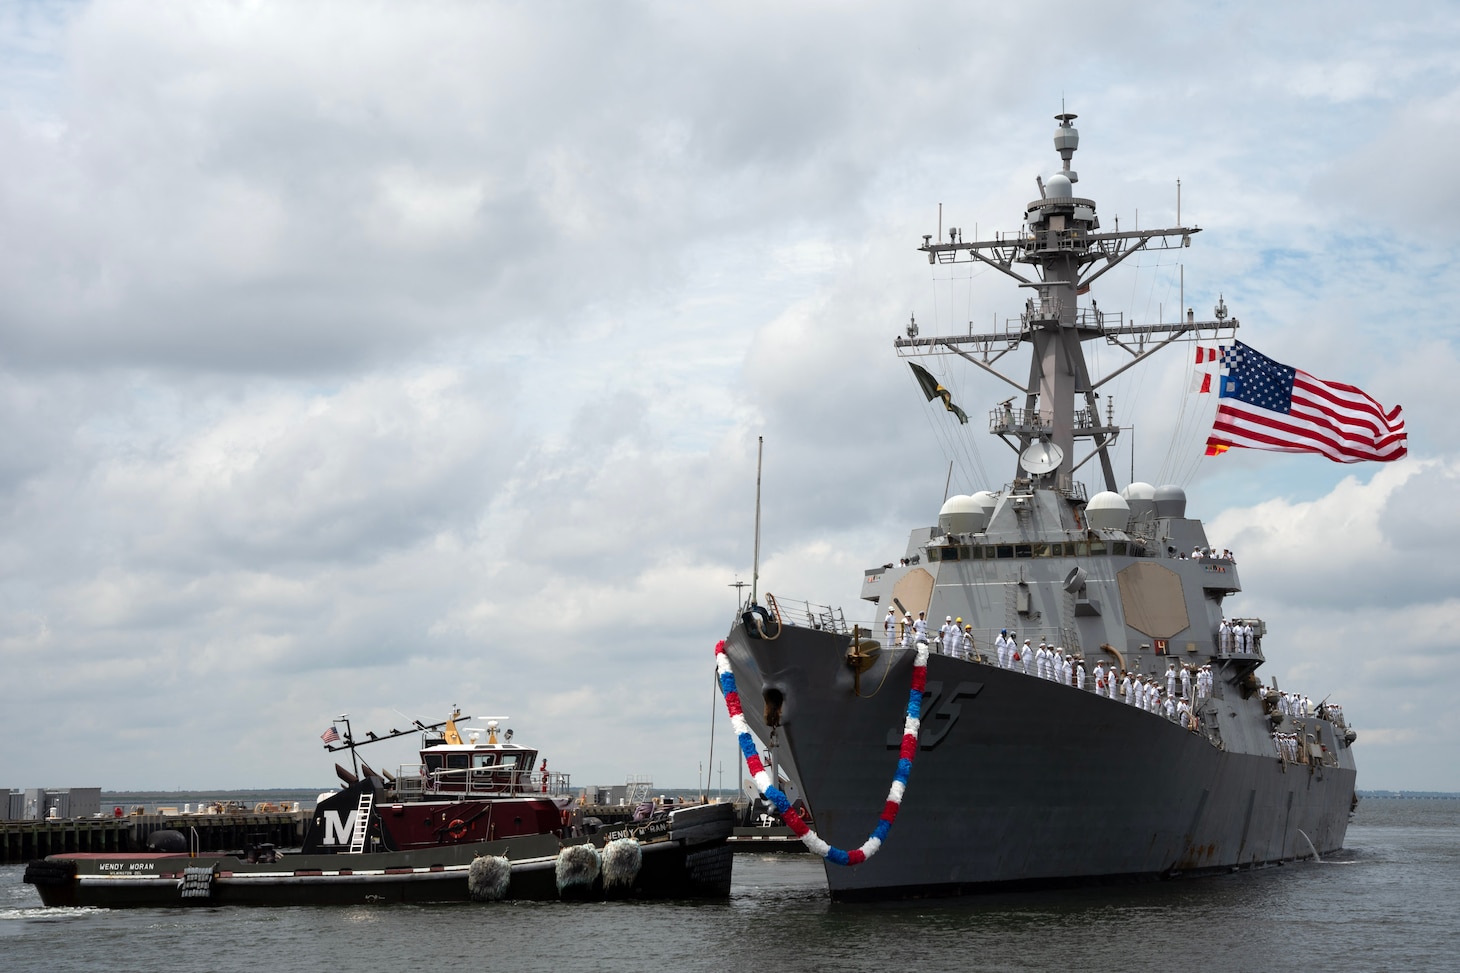 NORFOLK, Va. - The Arleigh Burke-class guided-missile destroyer USS James E. Williams (DDG 95) returns to Naval Station Norfolk following a seven-month NATO deployment, July 14, 2023. James E. Williams served as the flagship for Standing NATO Maritime Group (SNMG) 2. (U.S. Navy photo by Mass Communication Specialist 1st Class Jacob T. Waldrop)